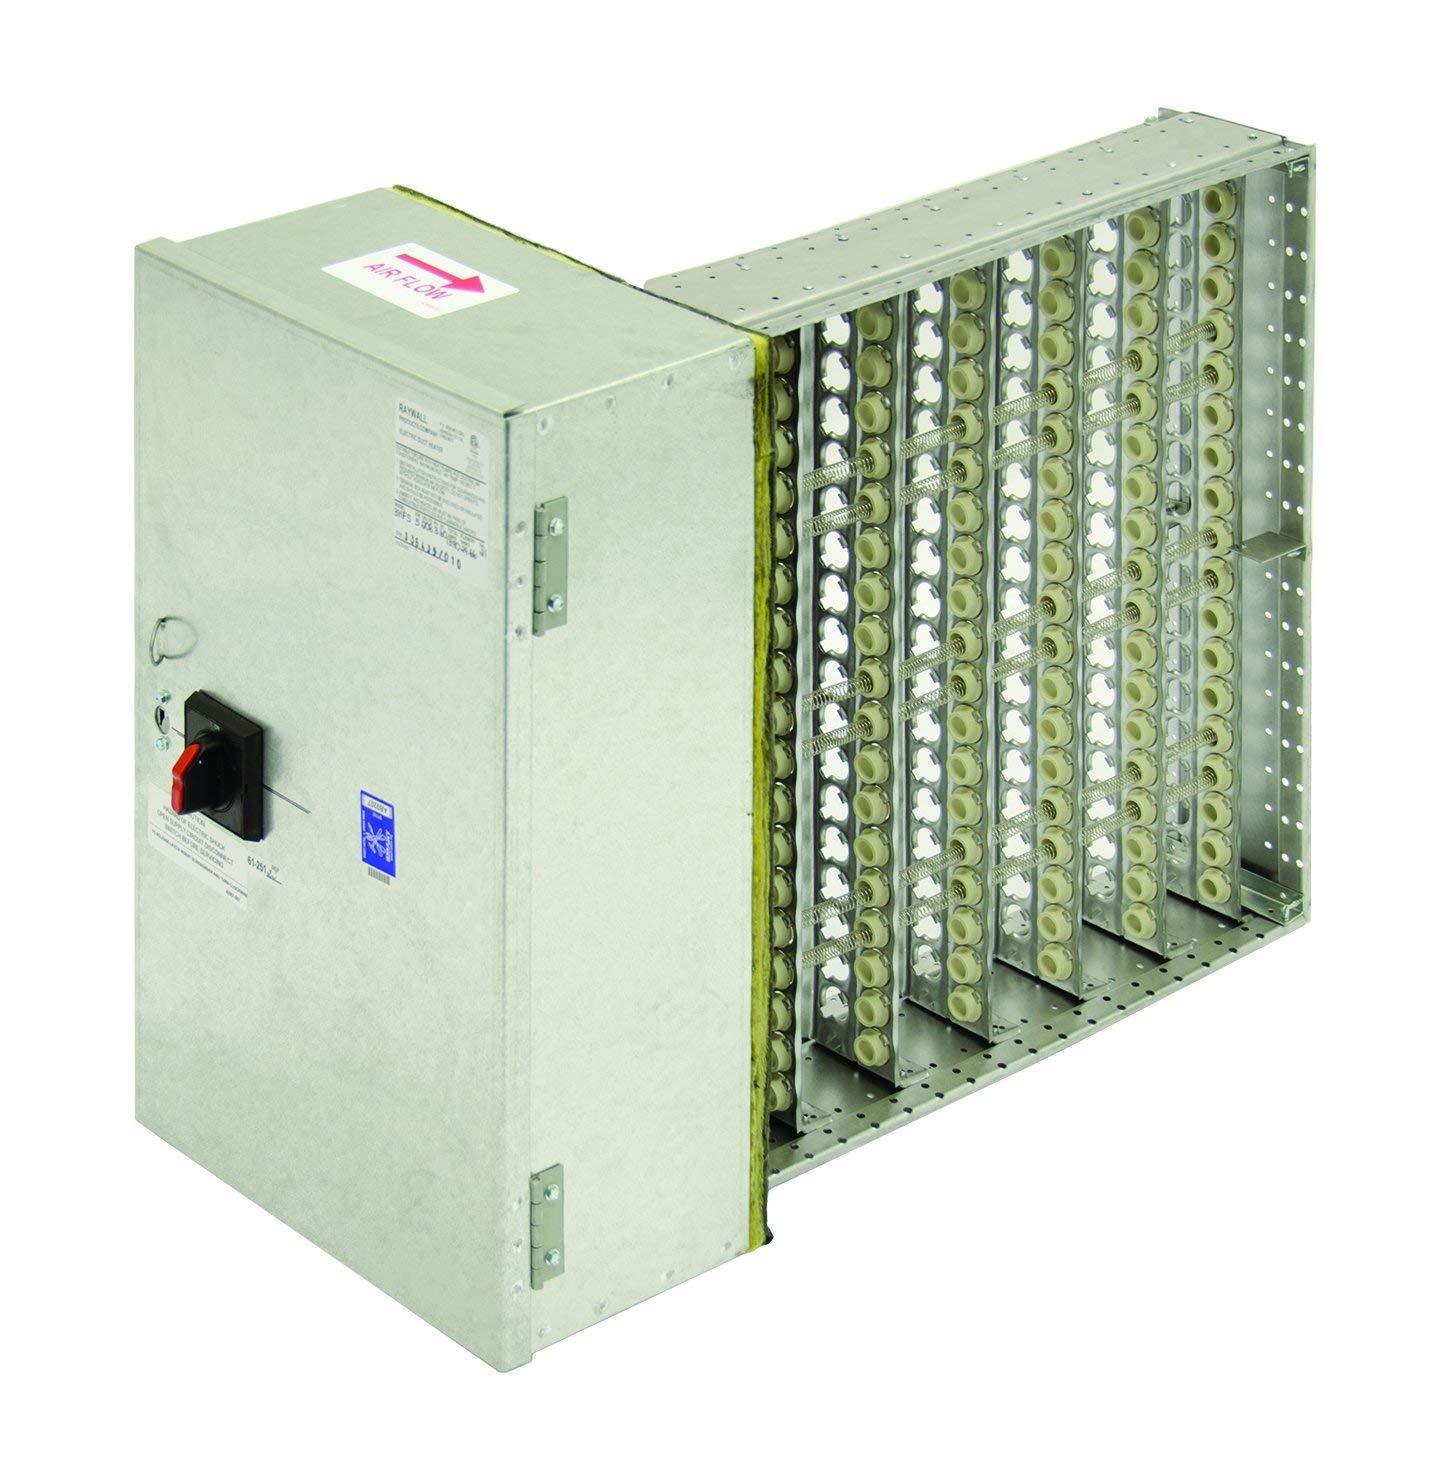 TPI 20KW 480V Packaged Duct Heater - 4PD2020123